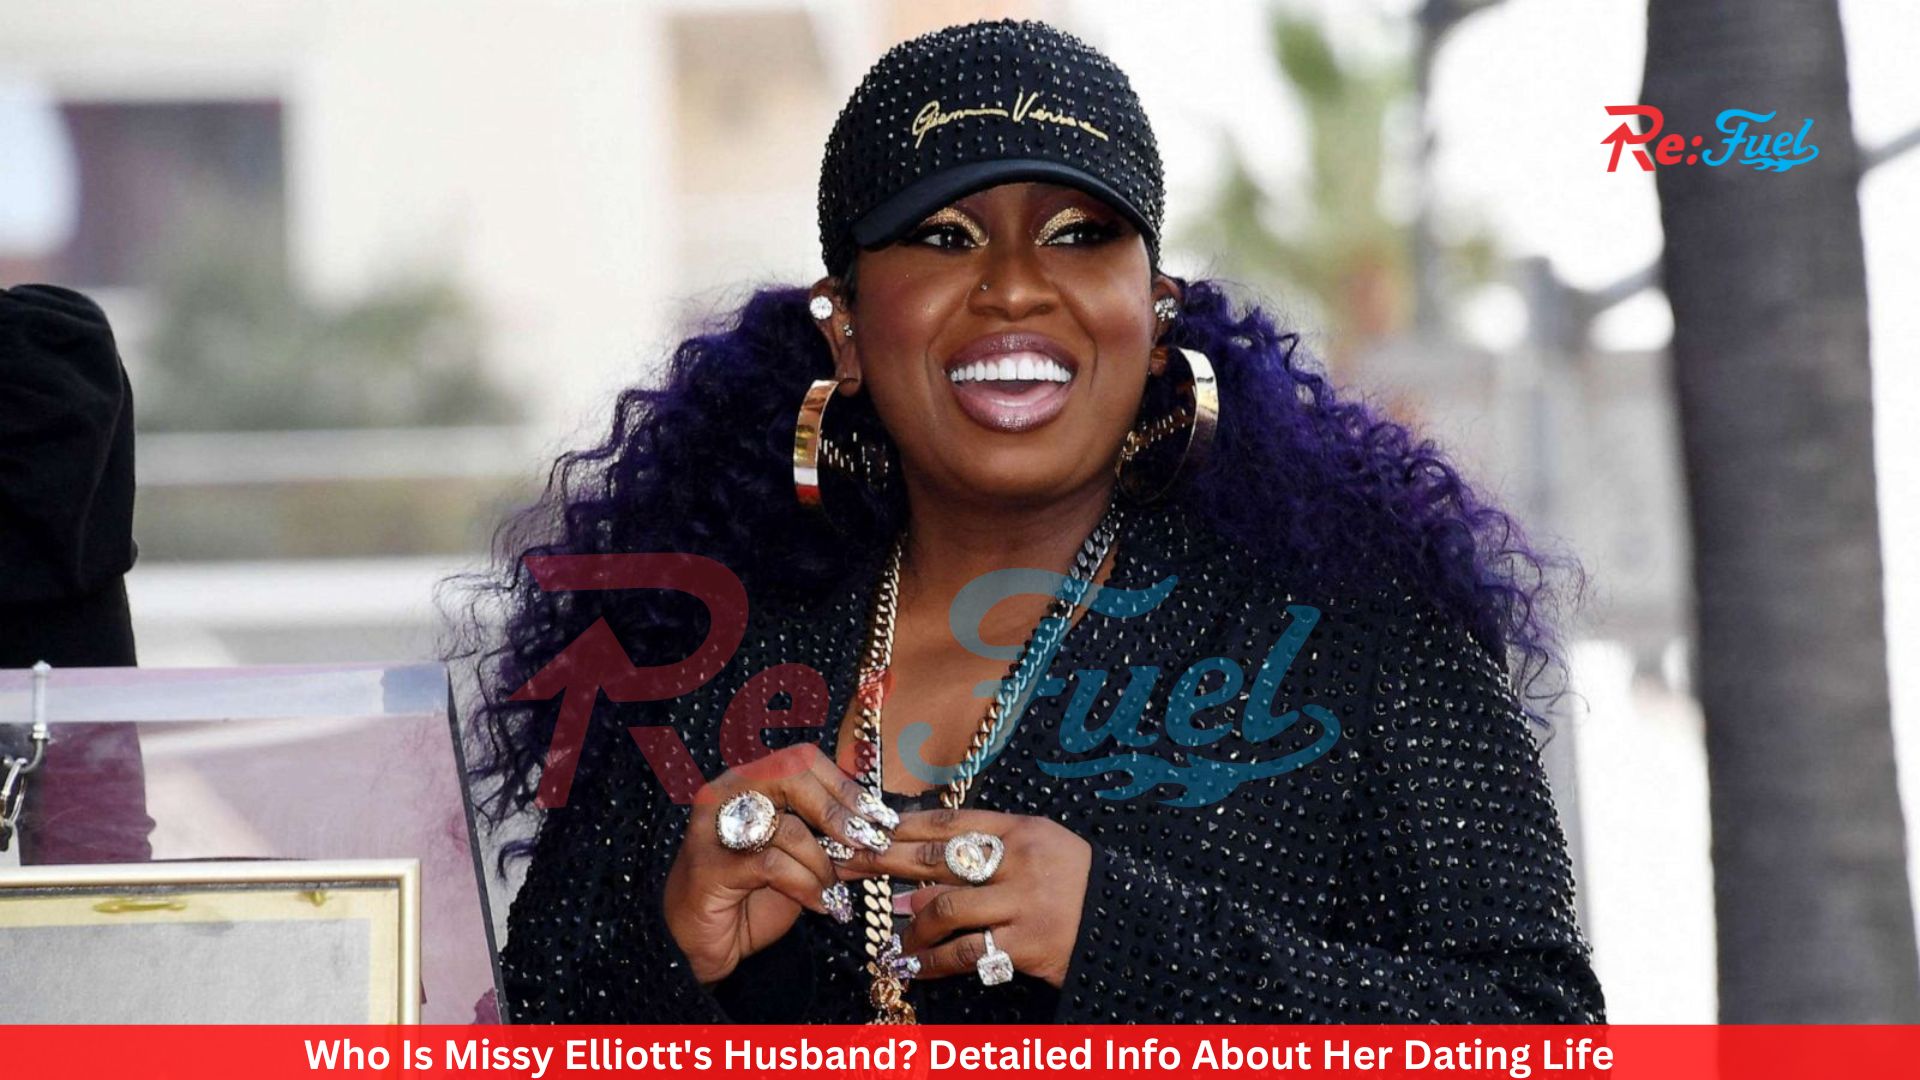 Who Is Missy Elliott's Husband? Detailed Info About Her Dating Life